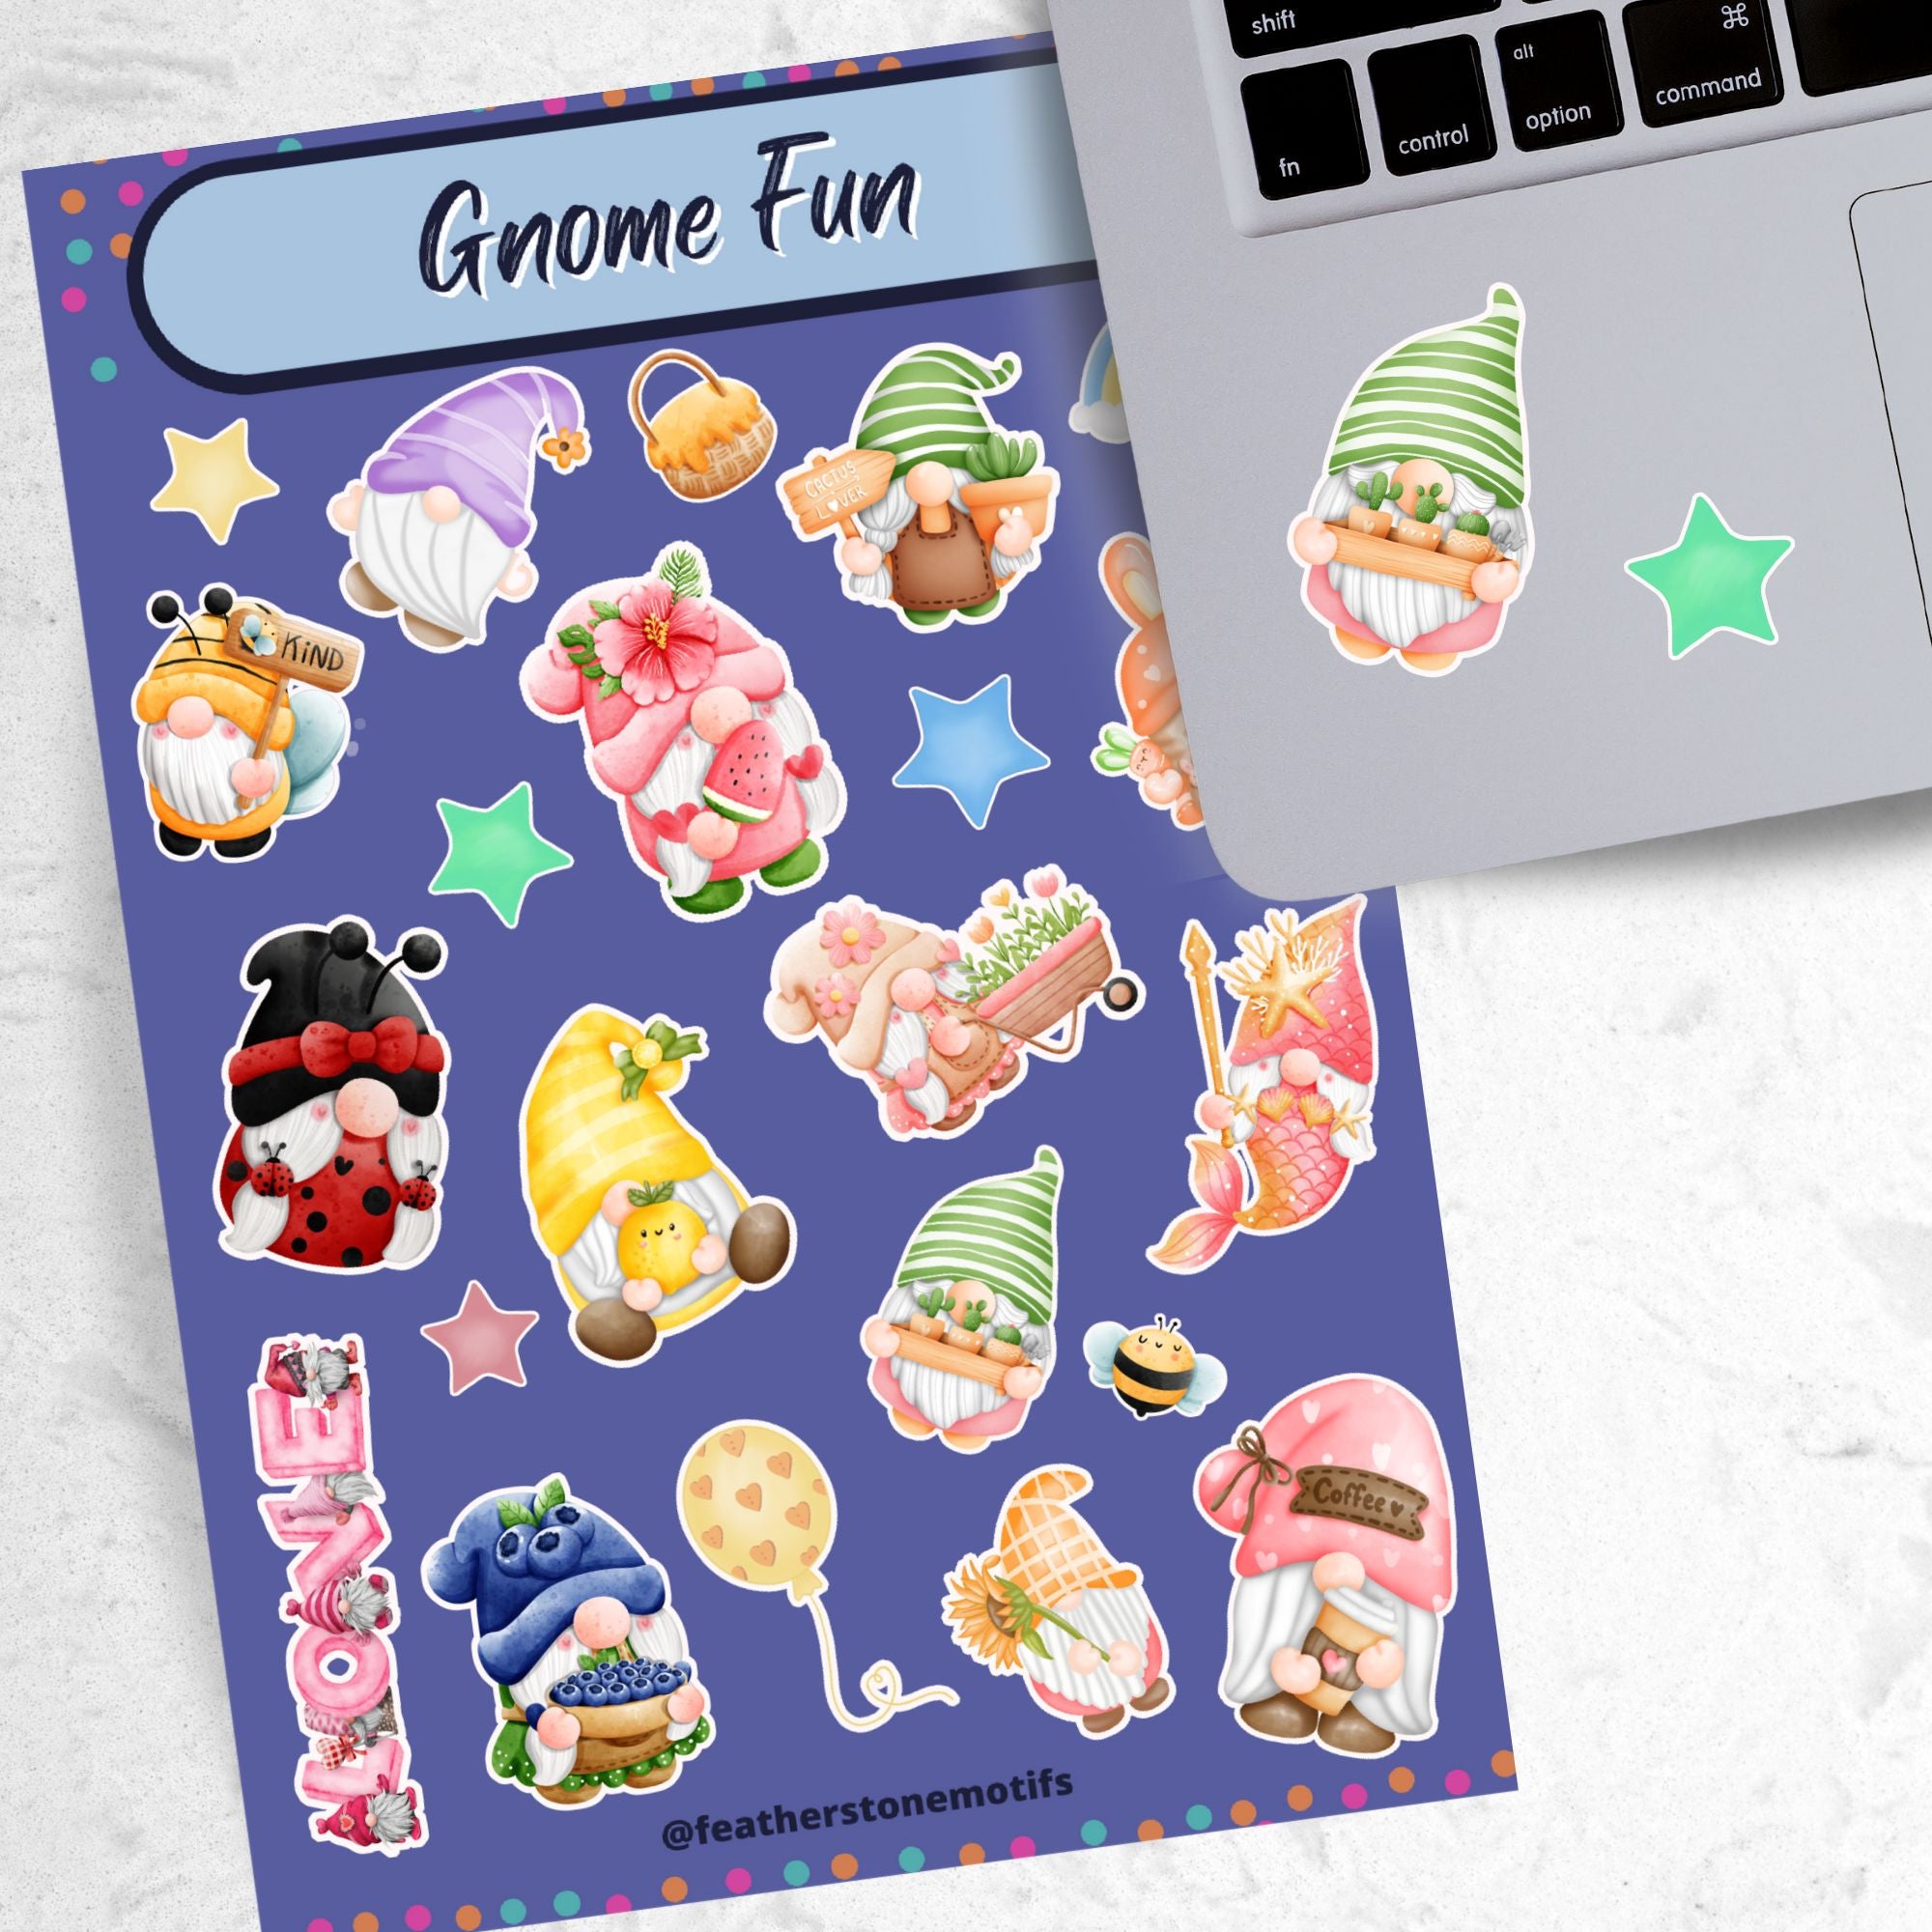 Who doesn't love gnomes? This sparkle sticker sheet features a host of gnomes along with rainbows, stars, balloons, and other sticker images. All with a sparkle holographic overlay! This image shows the Gnome Fun sticker sheet next to a laptop with two green gnome stickers applied below the keyboard.